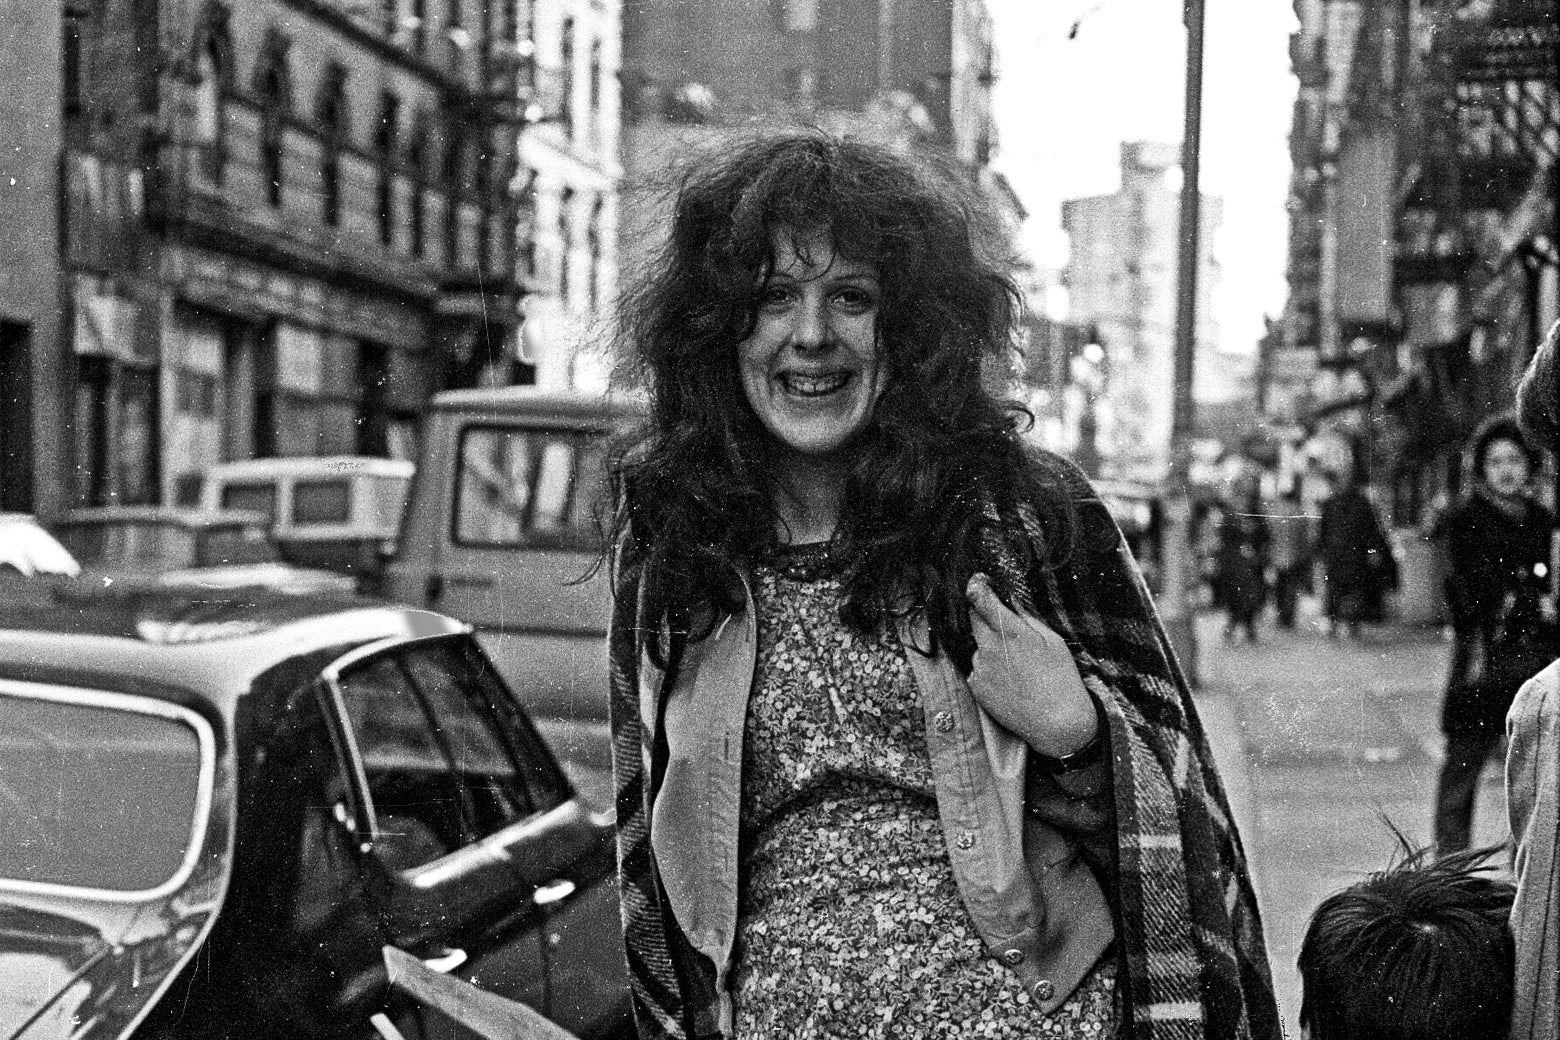 A black-and-white photo of Cynthia Heimel on Manhattan’s Lower East Side in 1973.